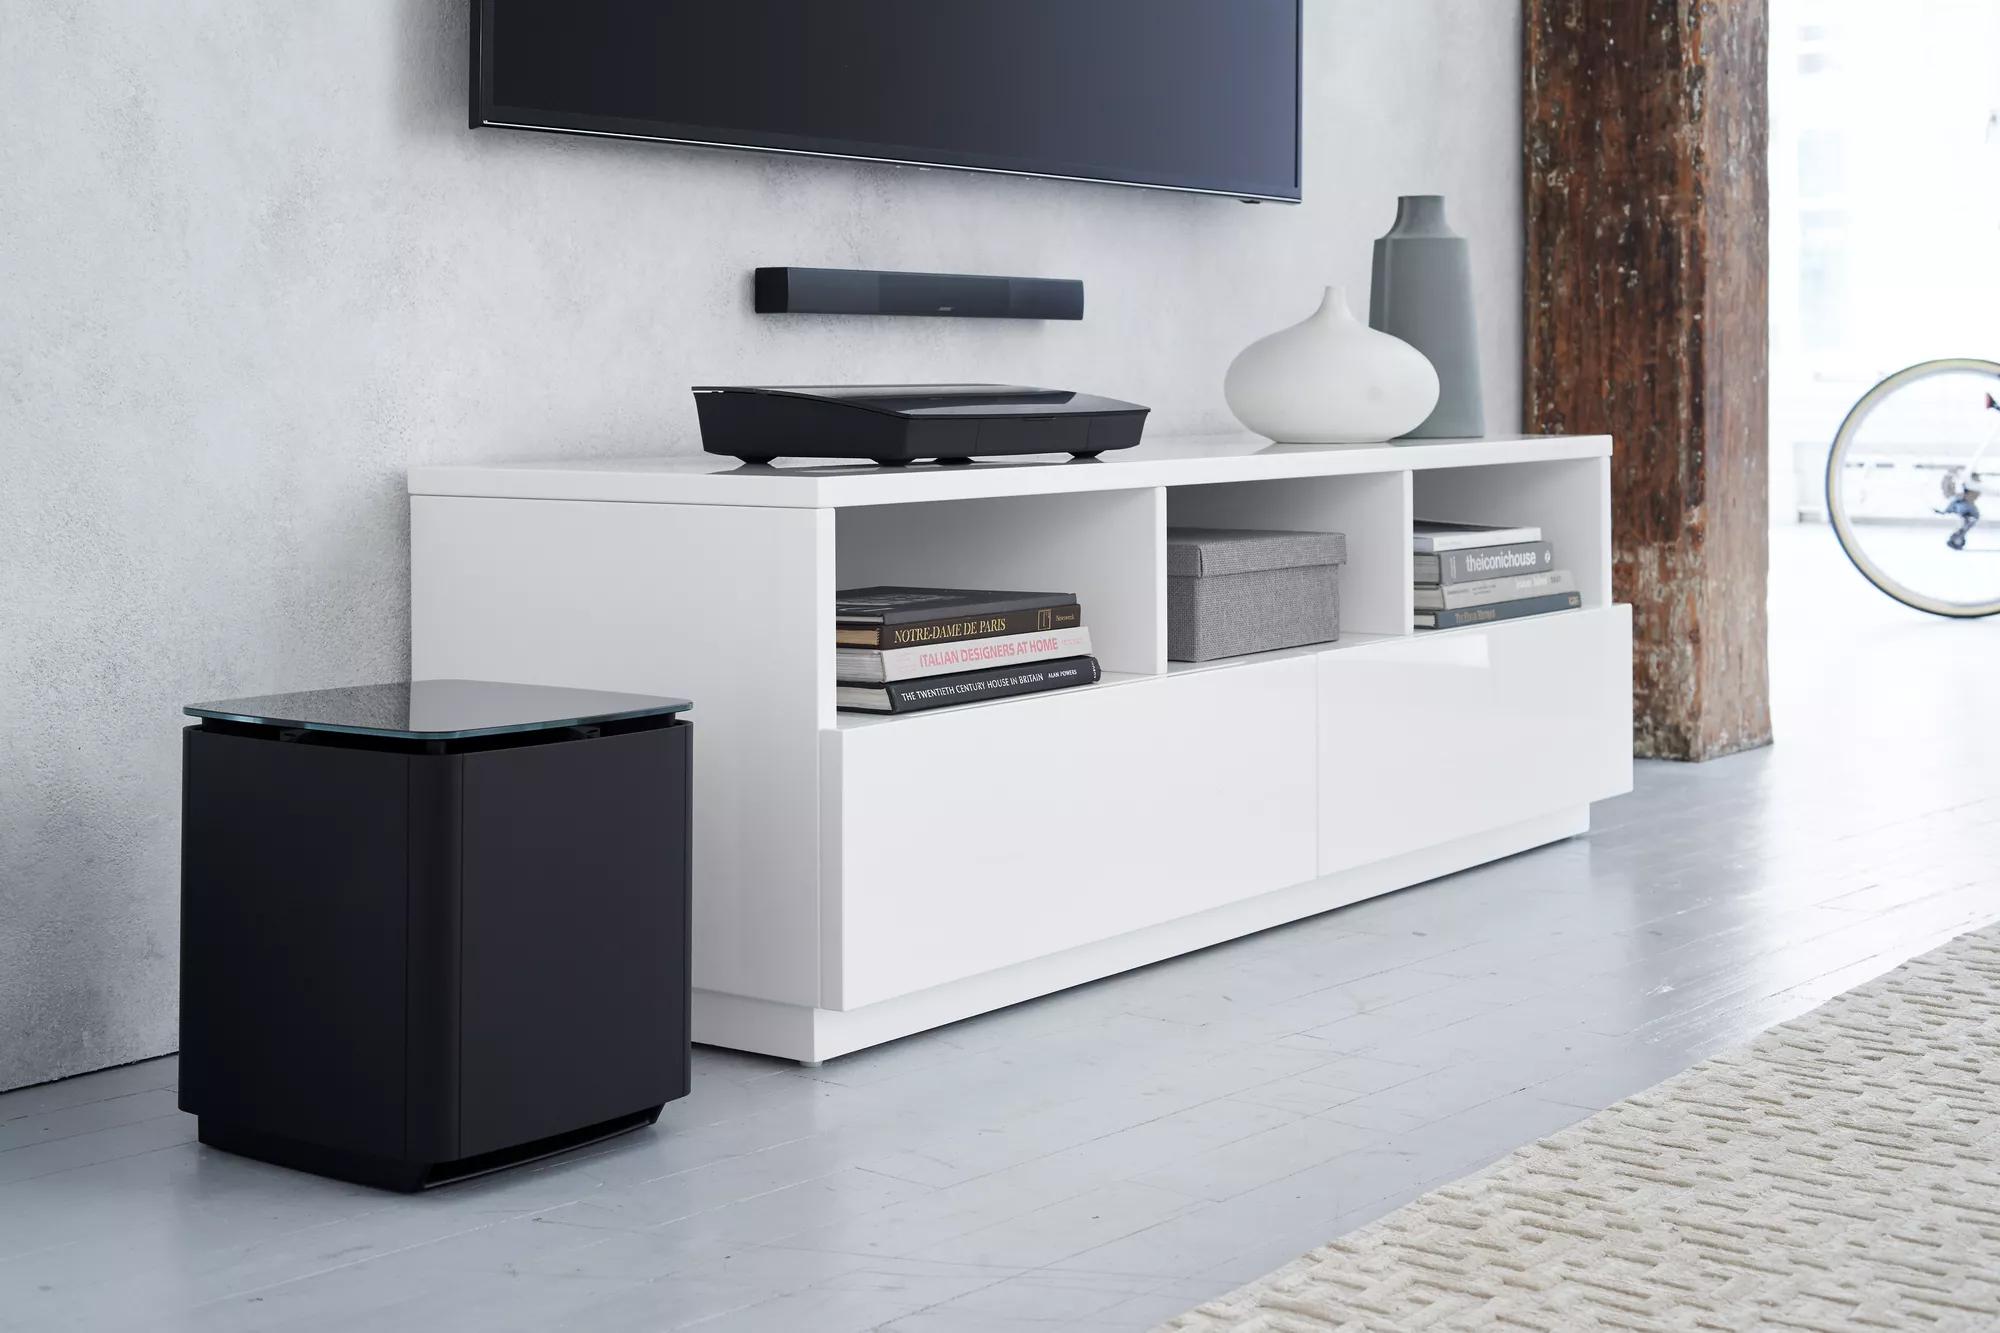 Lifestyle® 650 home entertainment system in the living room